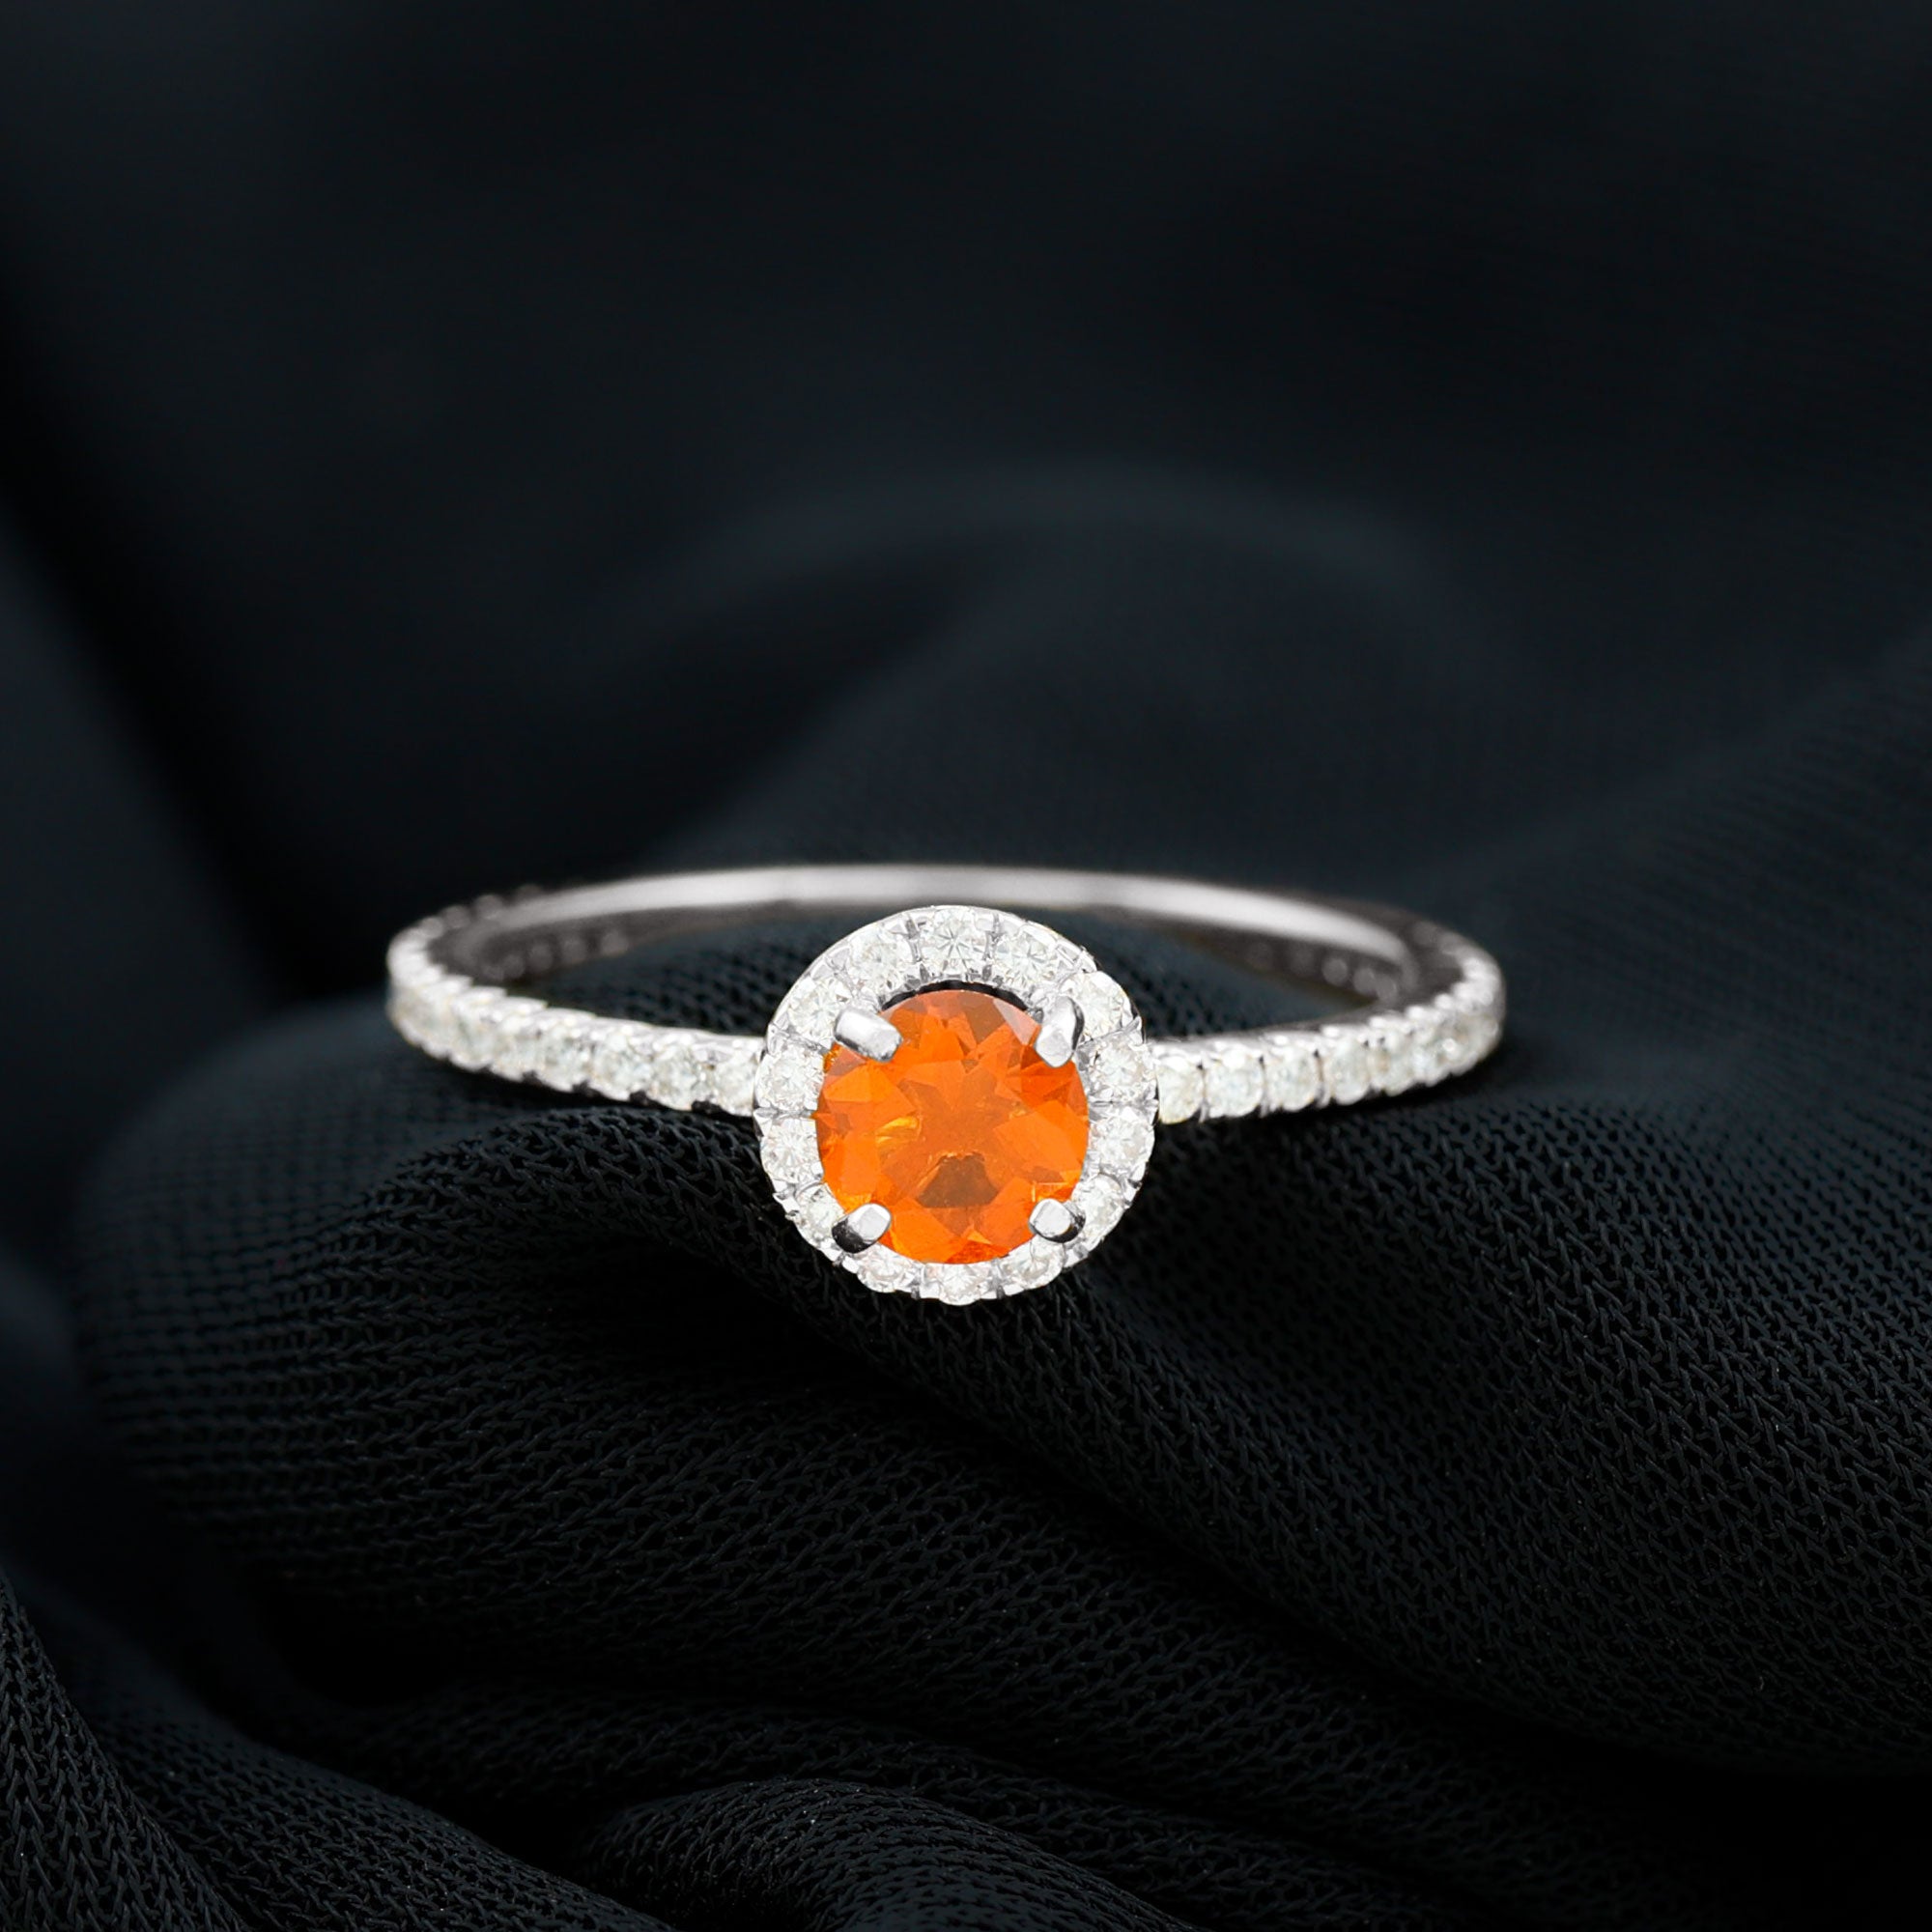 Round Shape Fire Opal Halo Engagement Ring with Diamond Fire Opal - ( AAA ) - Quality - Rosec Jewels